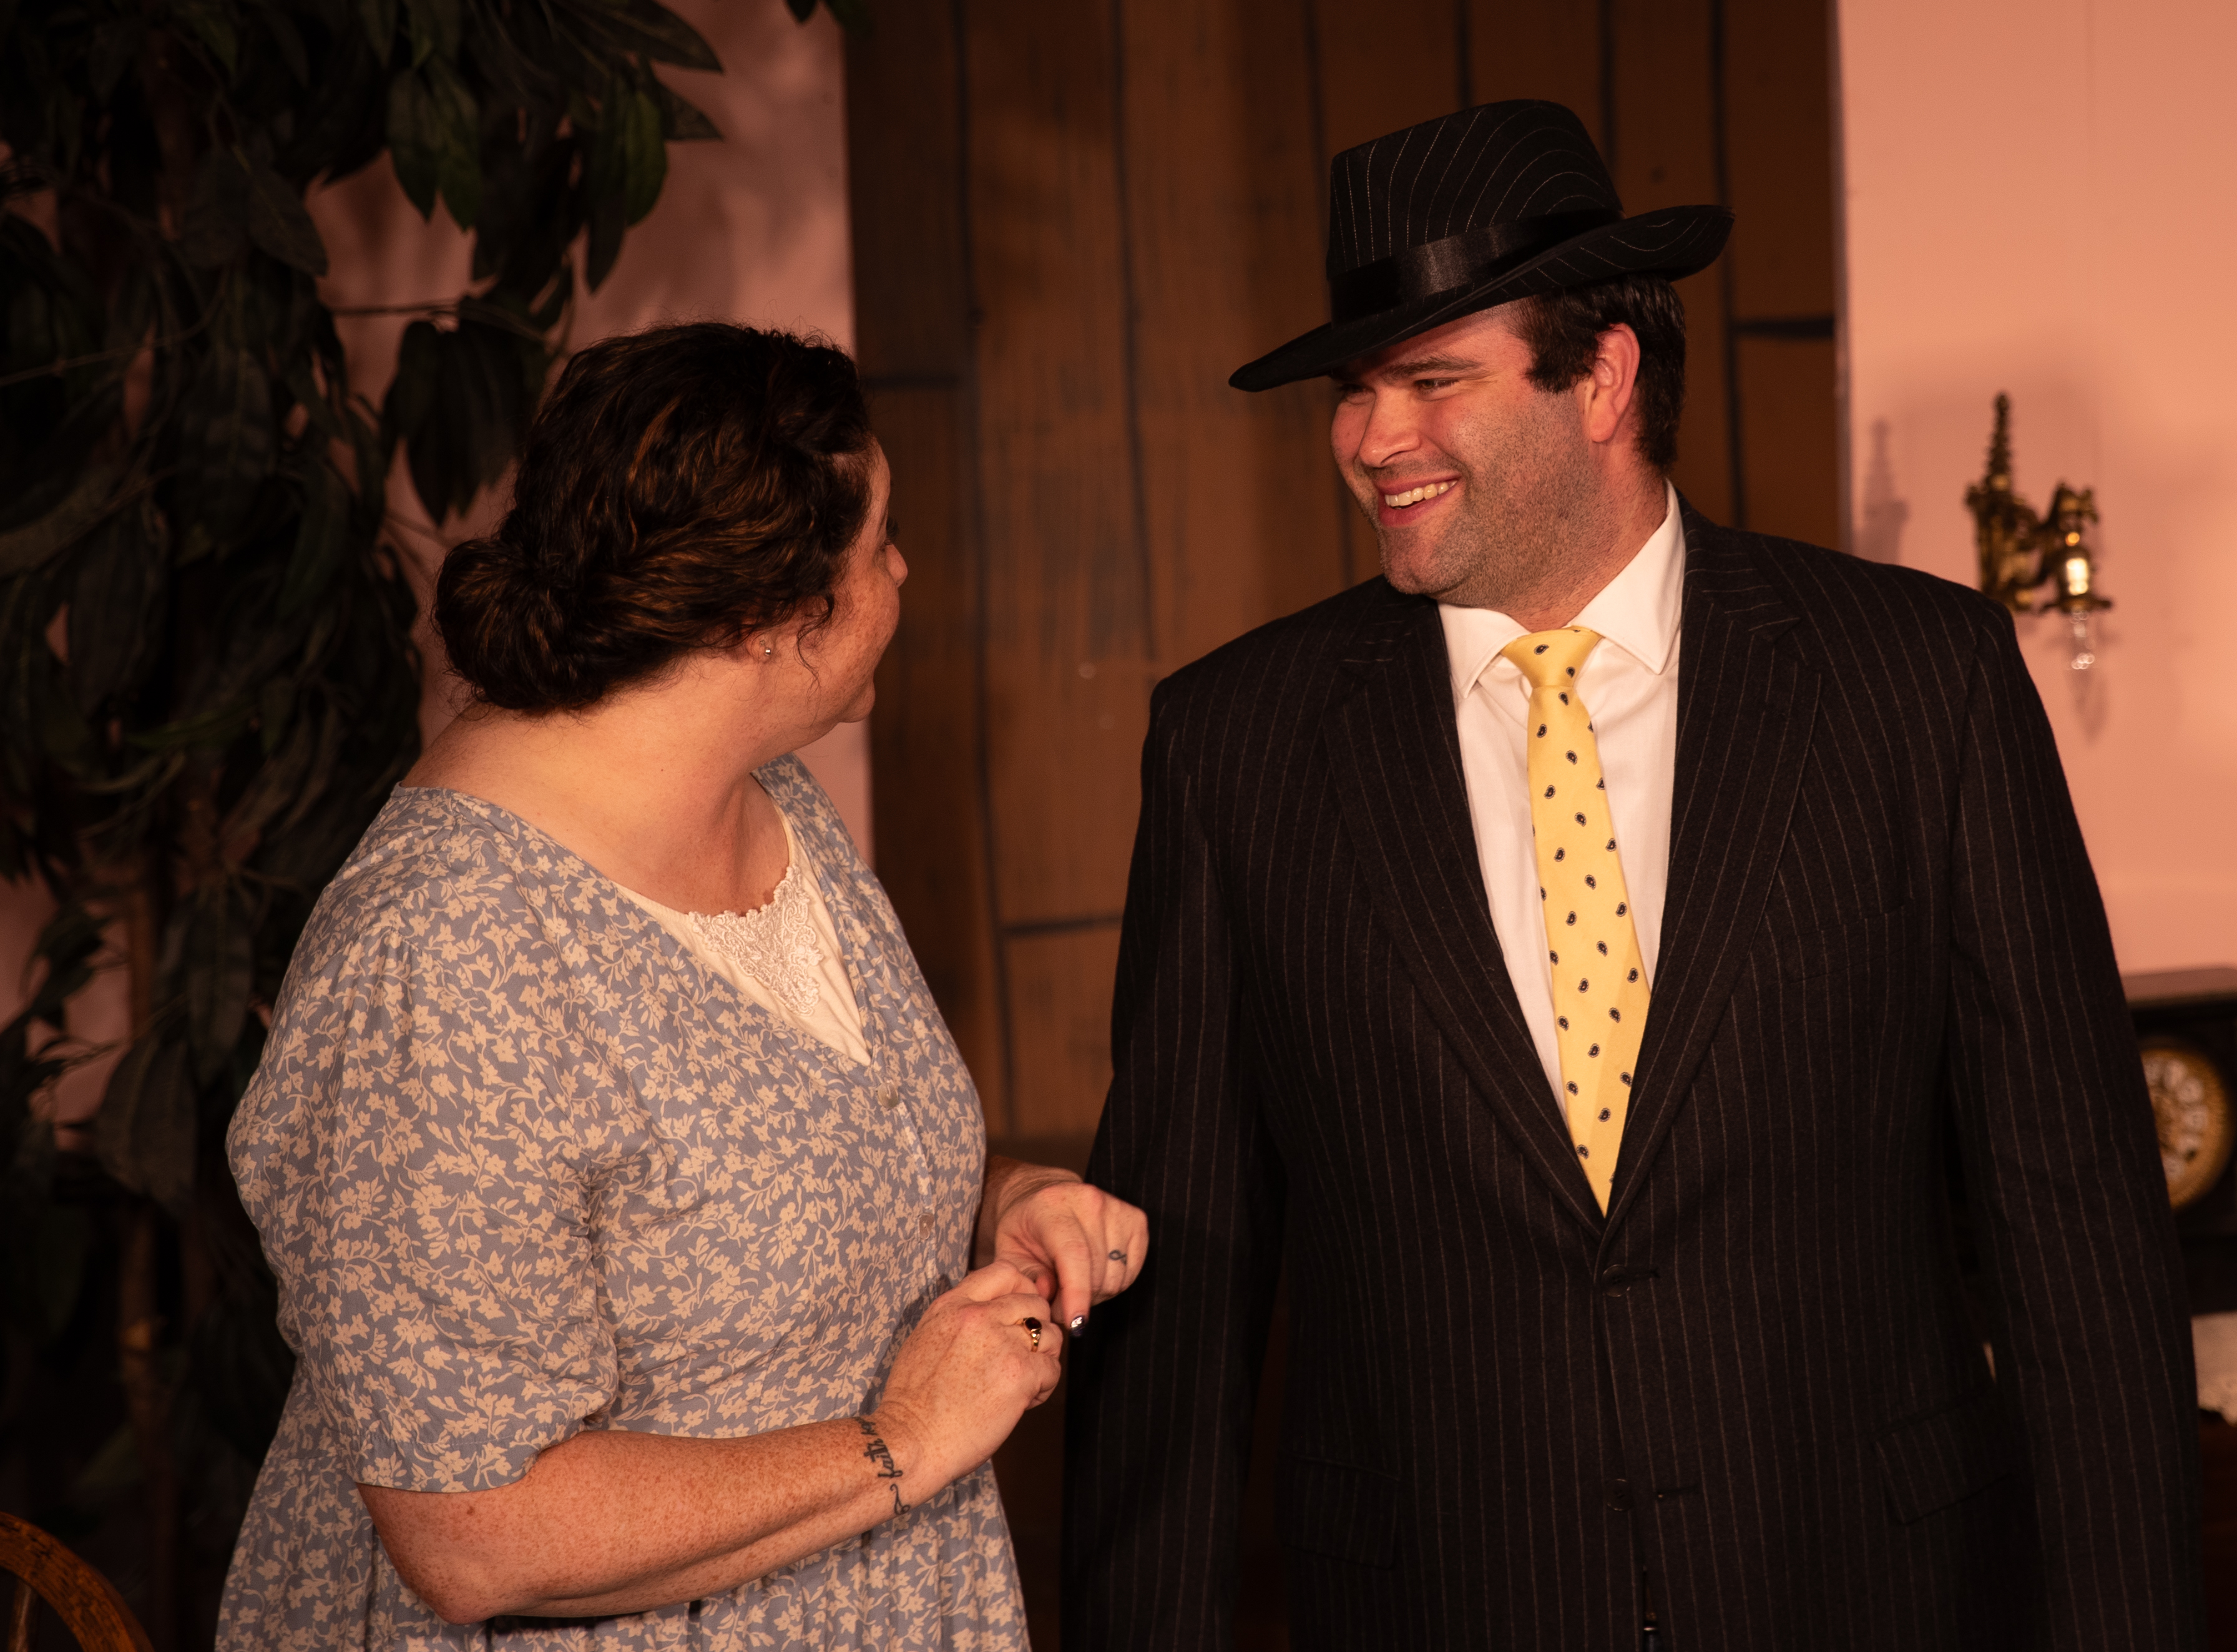 Denise Bishop Cotten as ABBY BREWSTER and Josh Head as JONATHAN BREWSTER